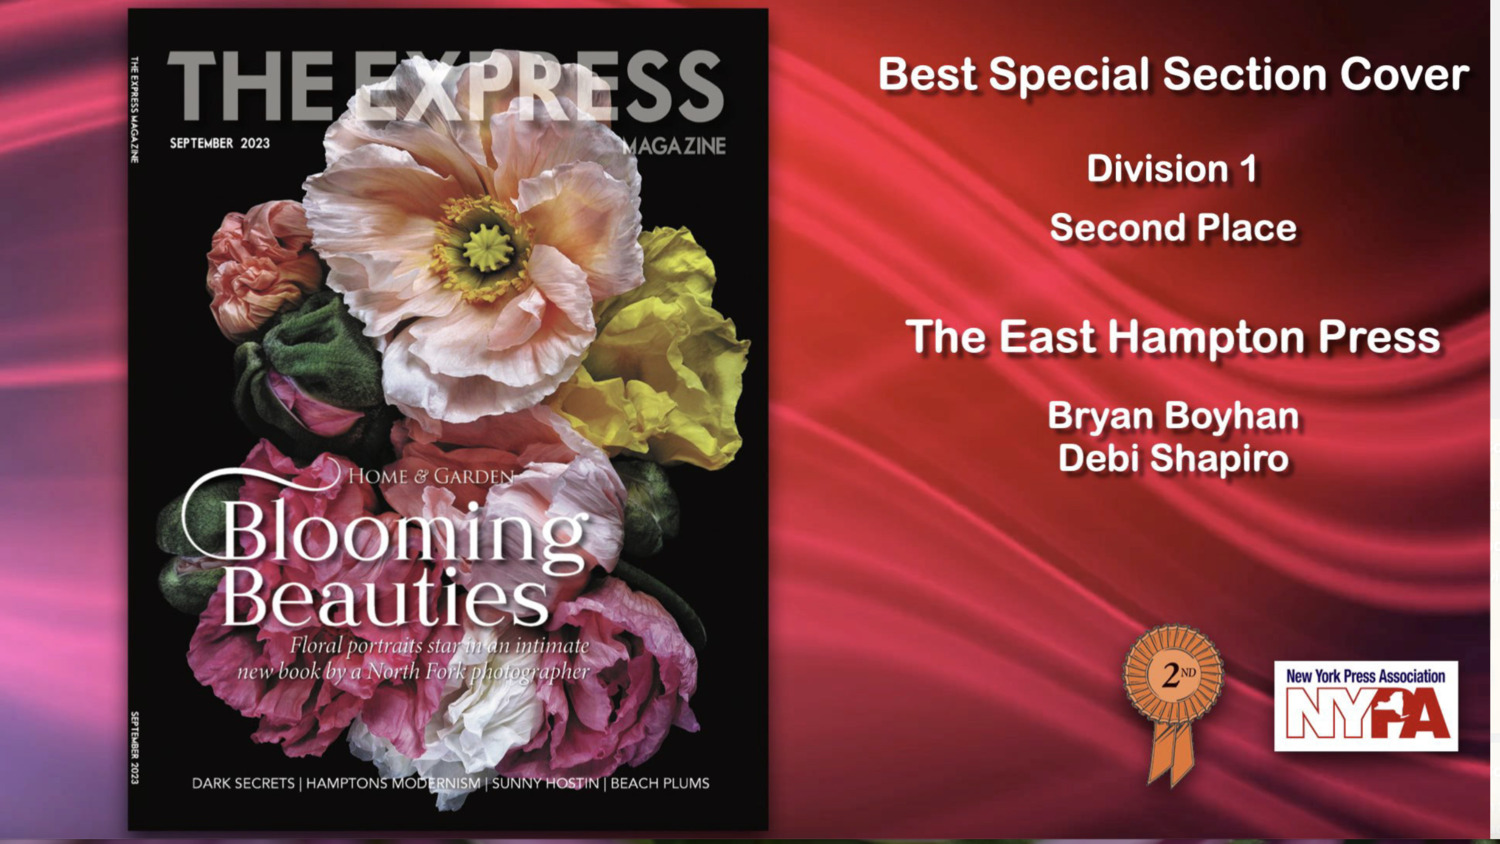 A NYPA win for The Express News Group.